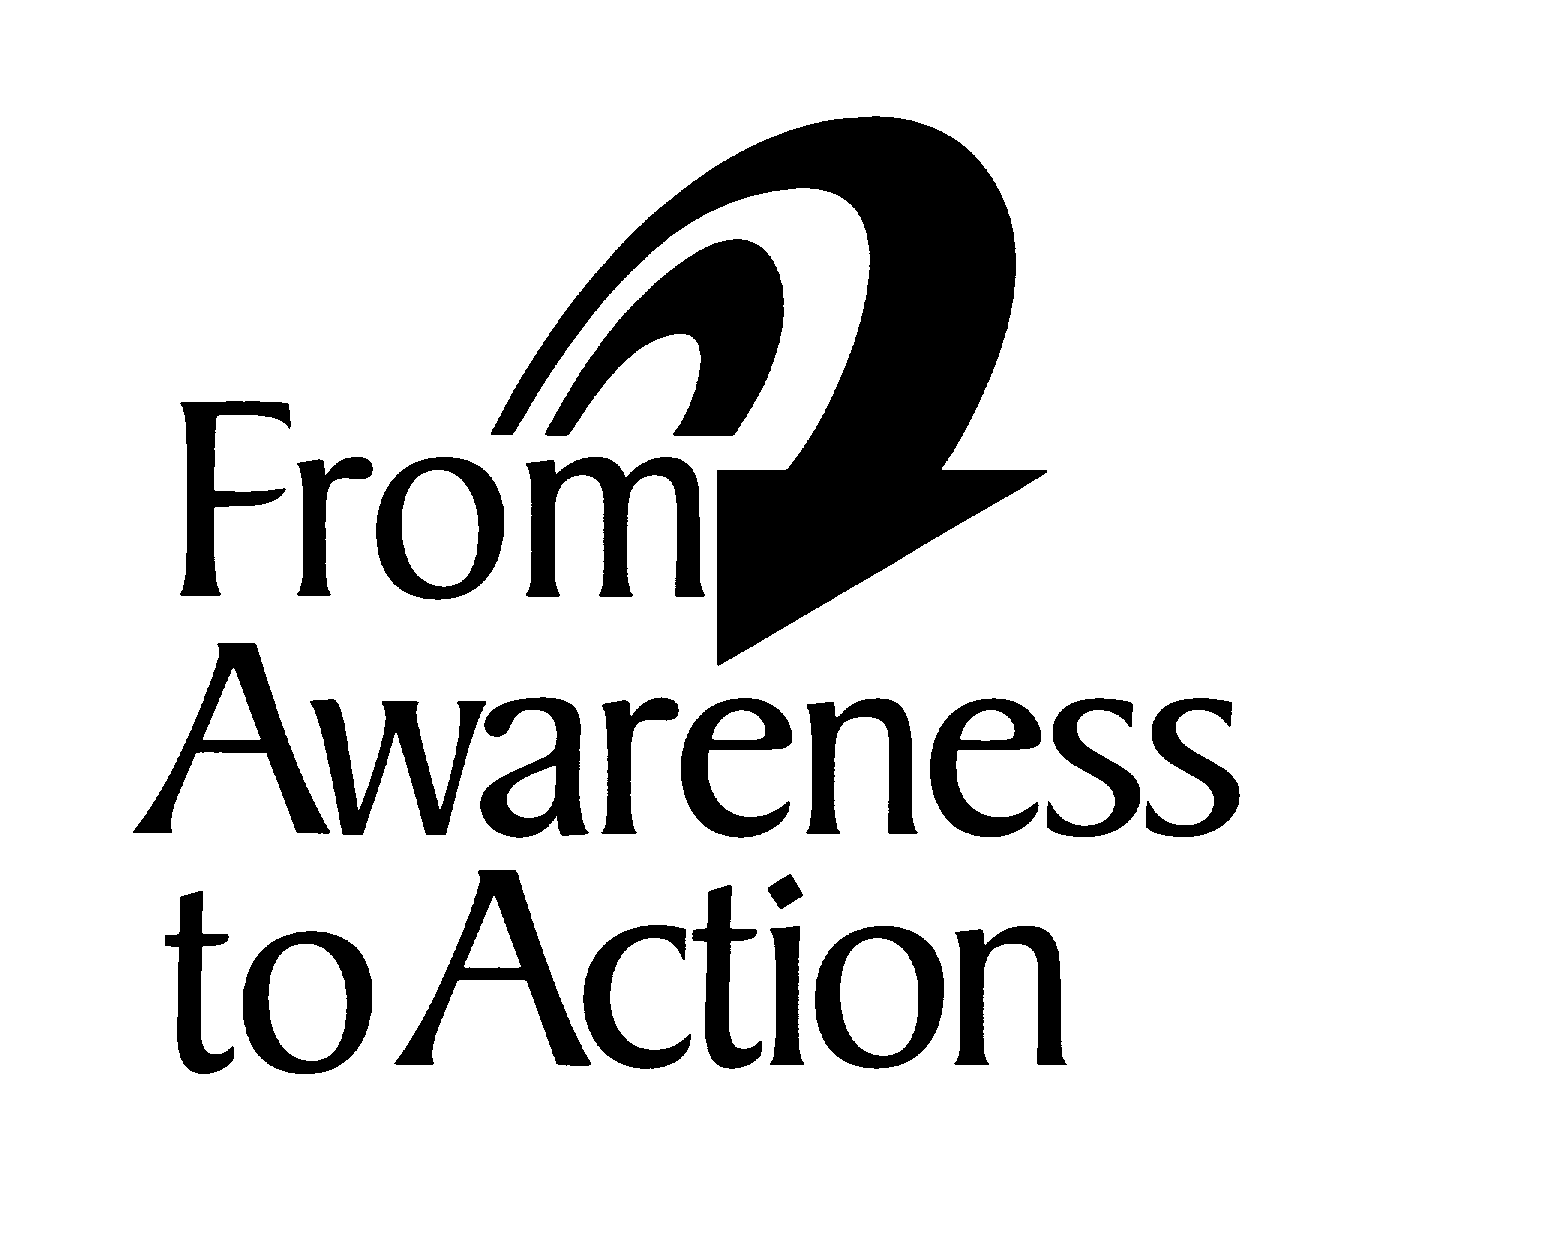  FROM AWARENESS TO ACTION